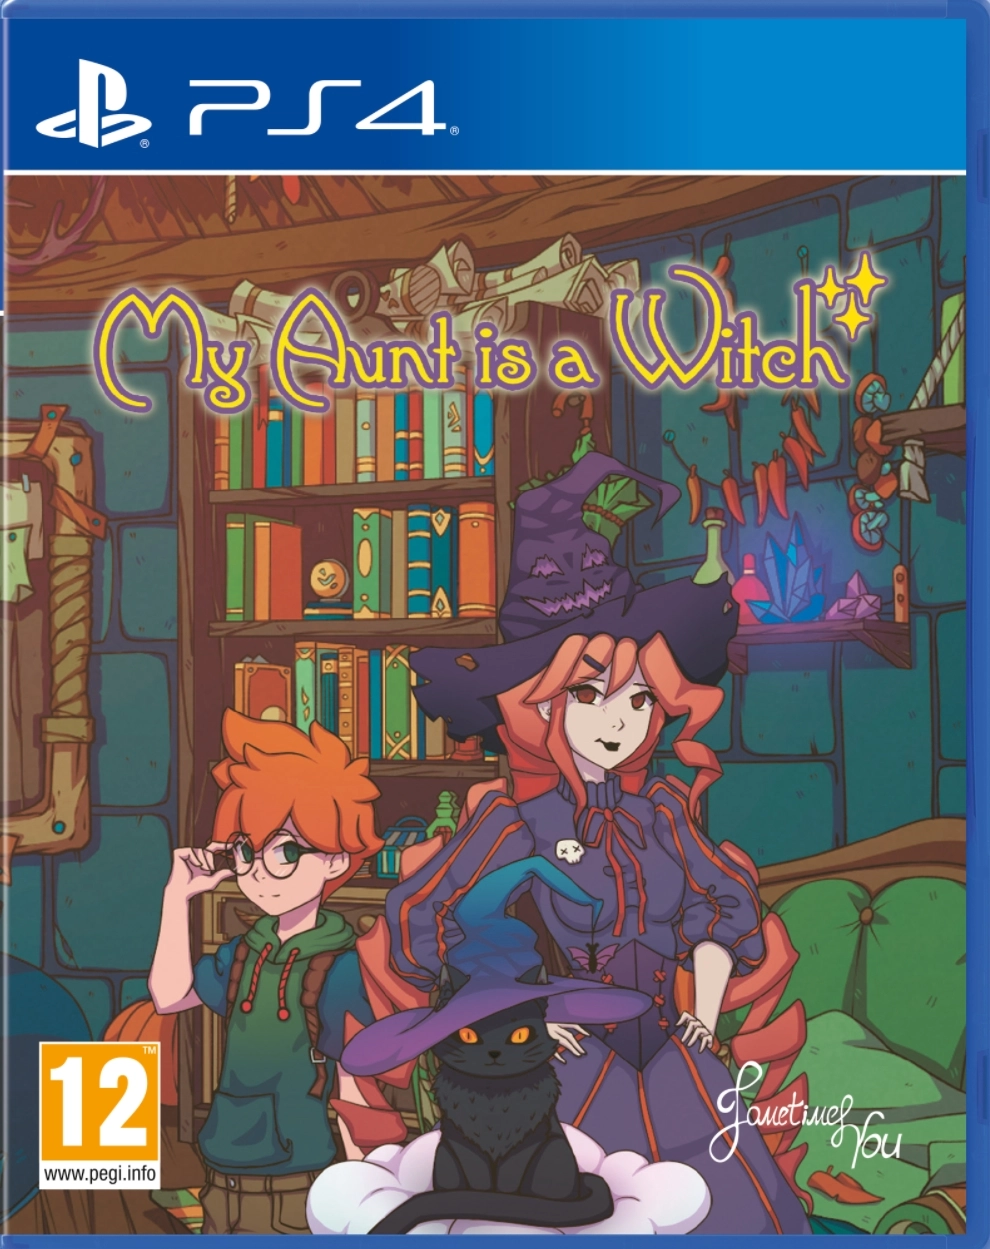 My Aunt is a Witch (PS4), Red Art Games